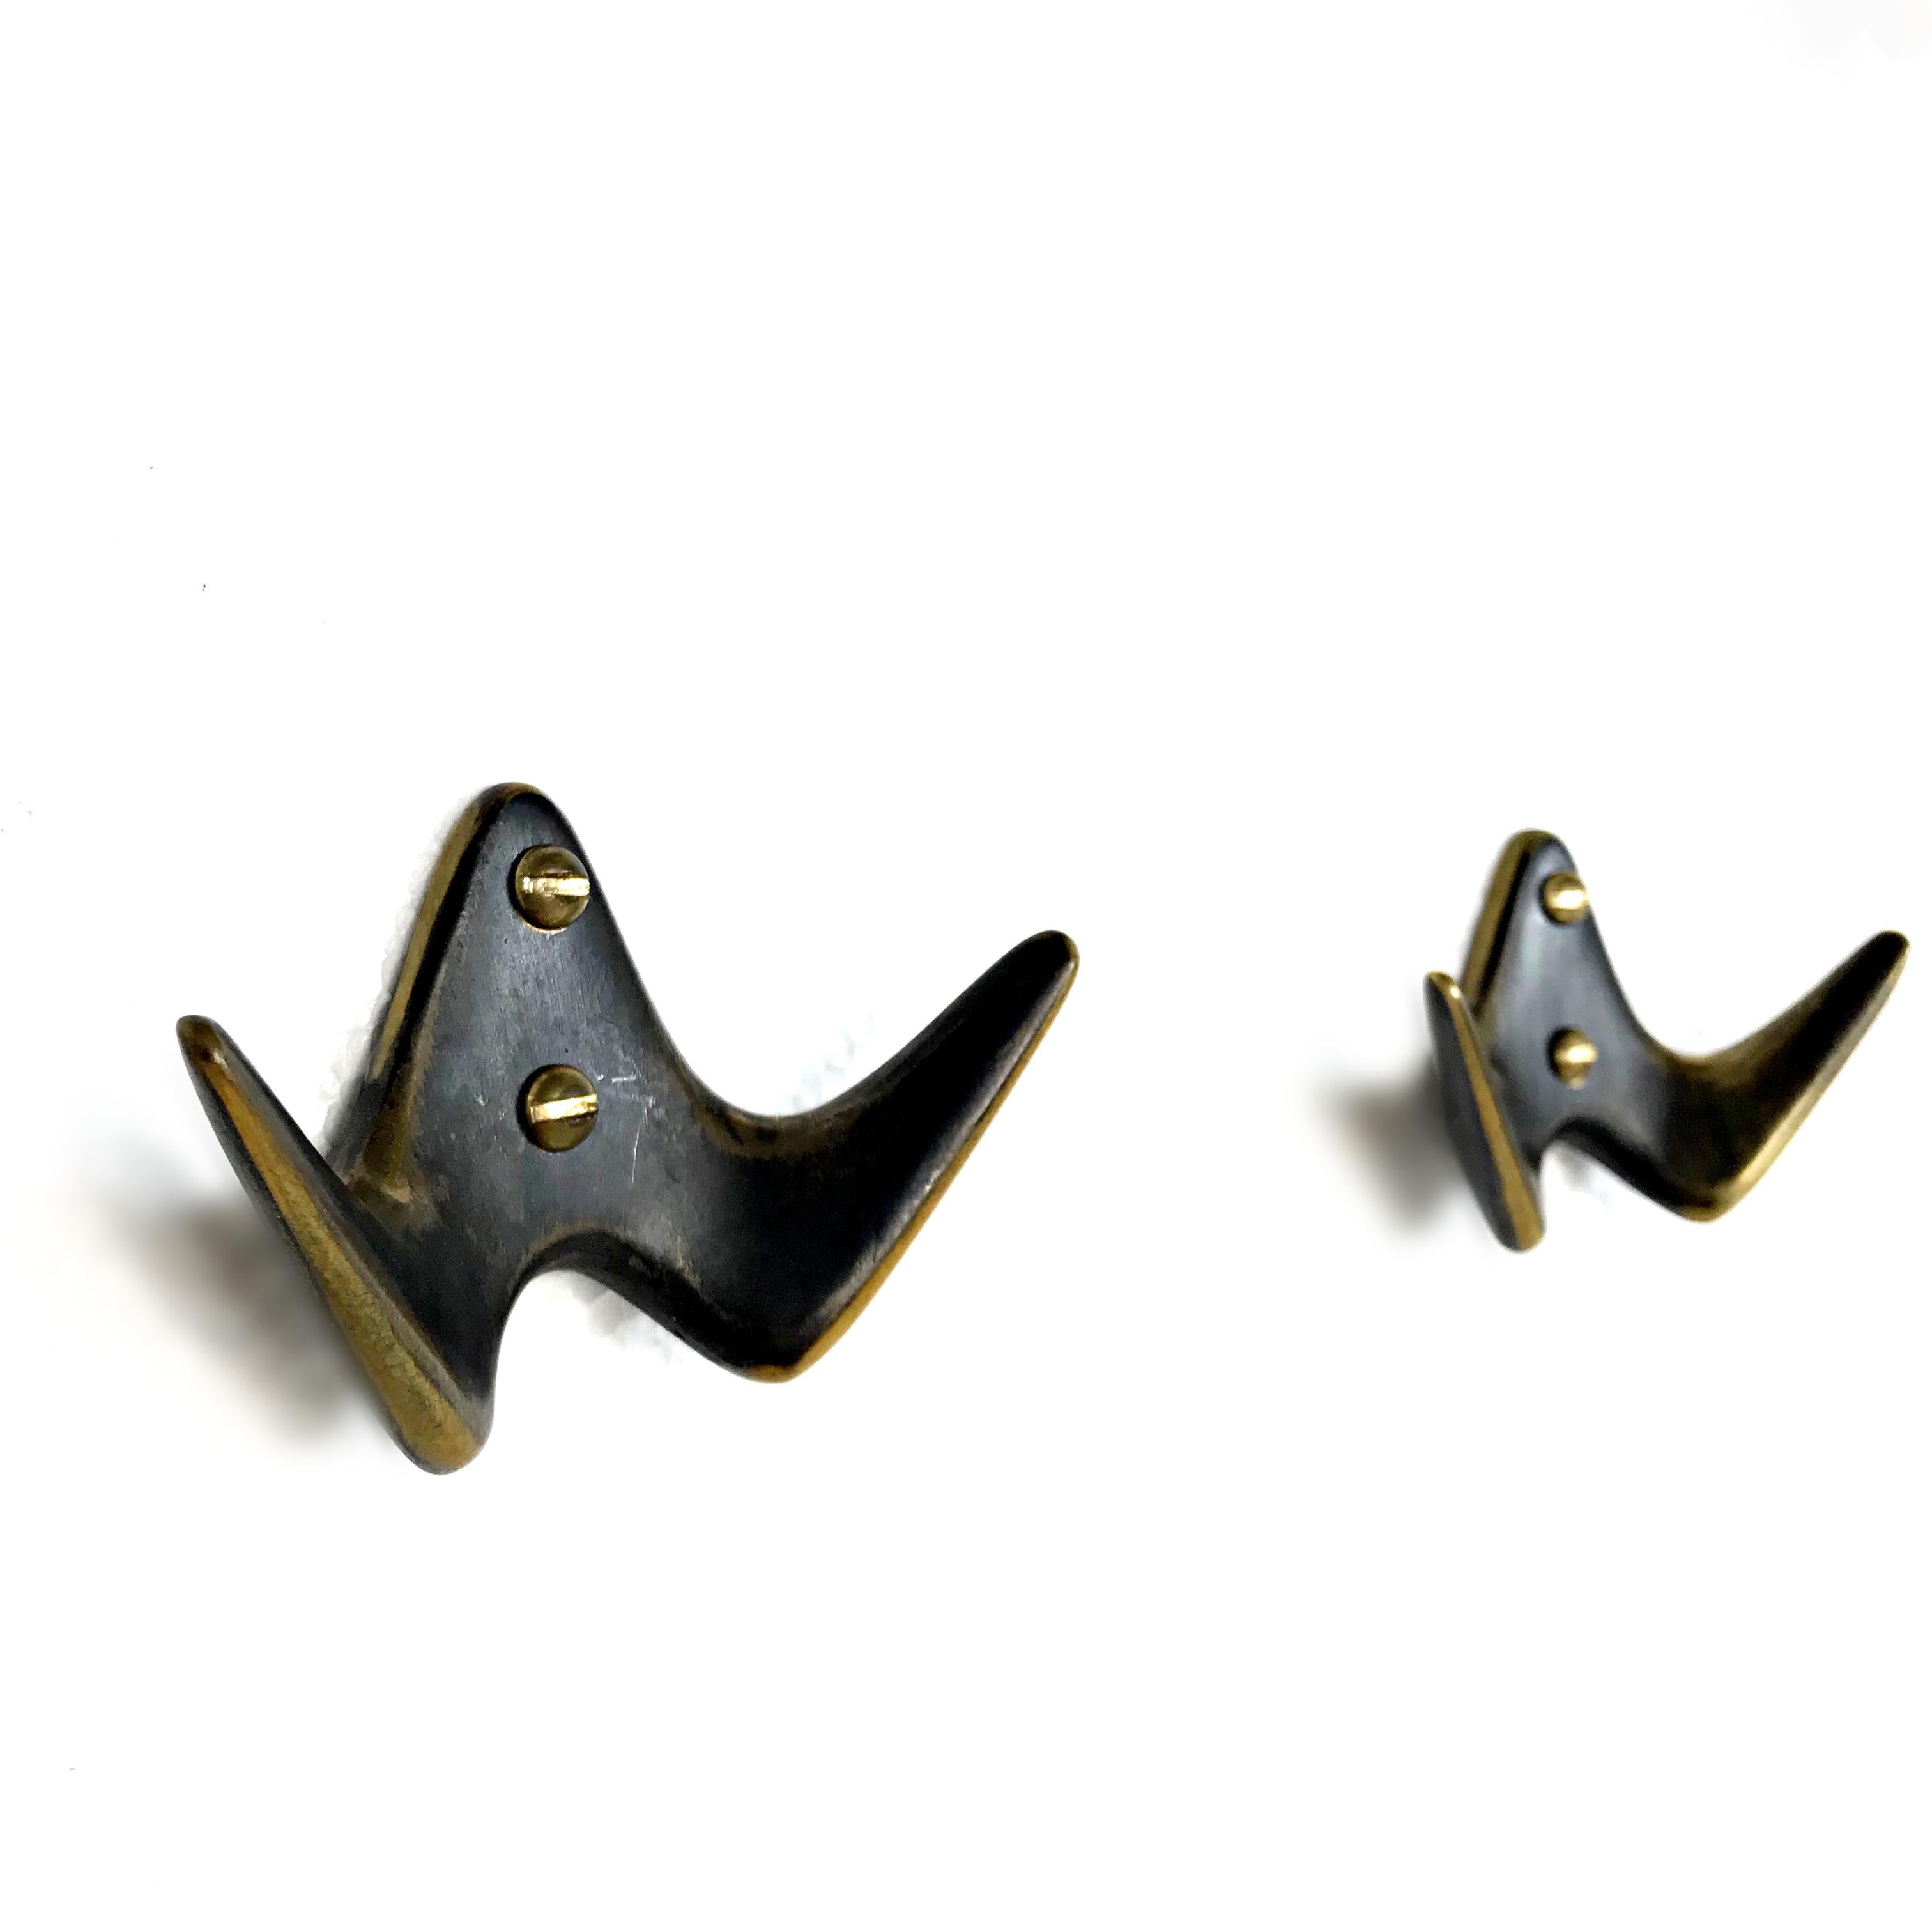 Beautiful Austrian Mid-Century Modern solid brass hooks by Carl Auböck II from 1950s. They are made of polished and patinated solid brass and come with the original brass screws. In excellent original condition. We also have the matching big hooks